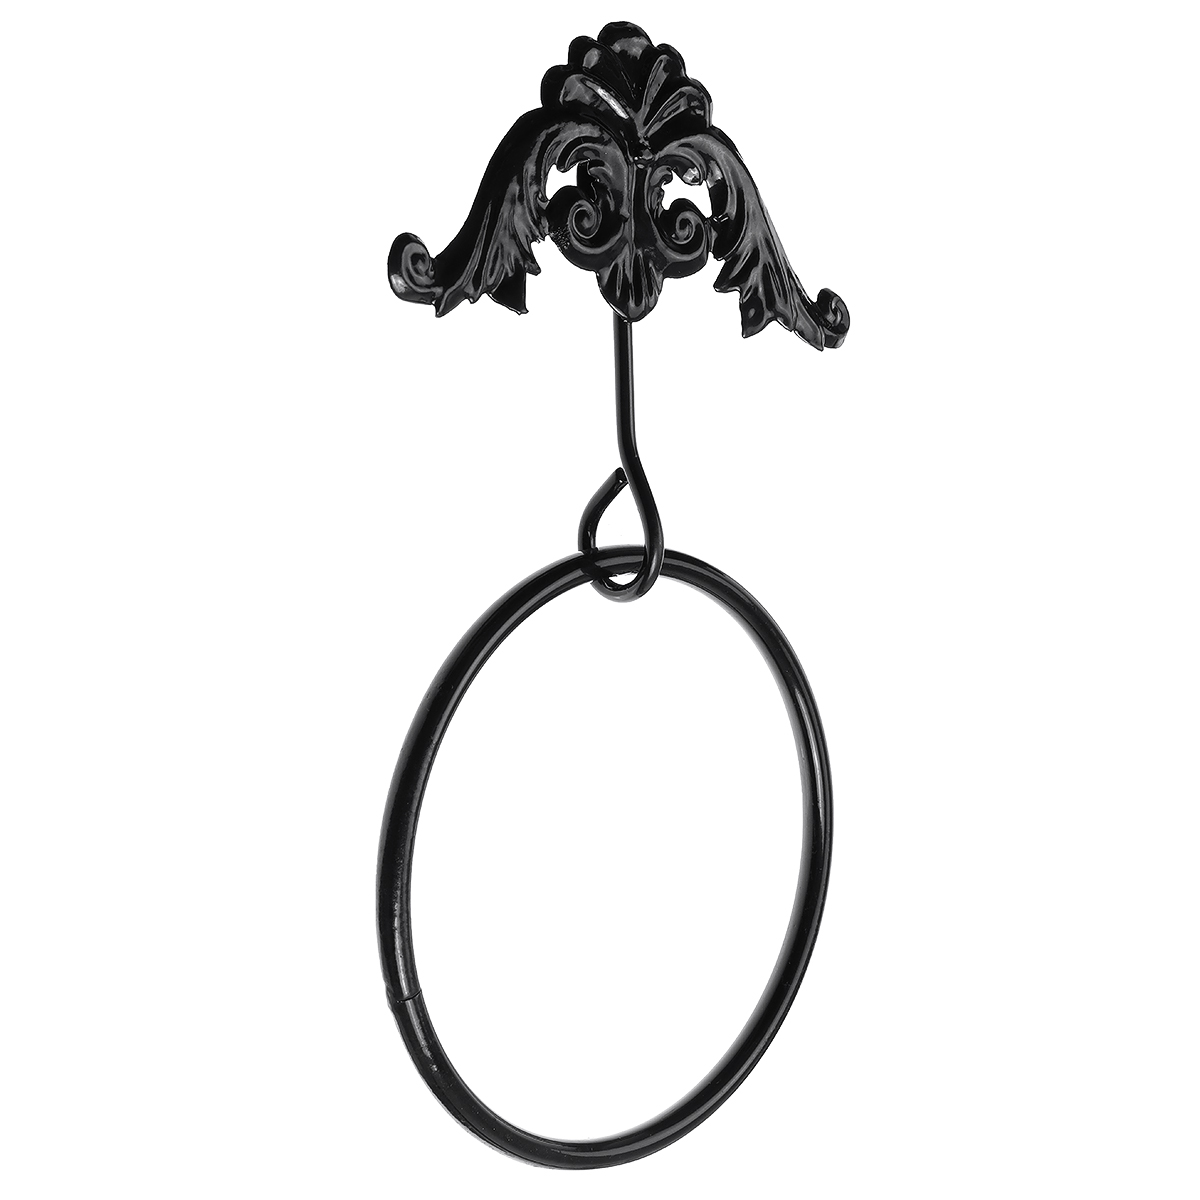 Stainless-Steel-Wall-Mounted-Bathroom-Toilet-Hand-Towel-Ring-Holder-1628709-5